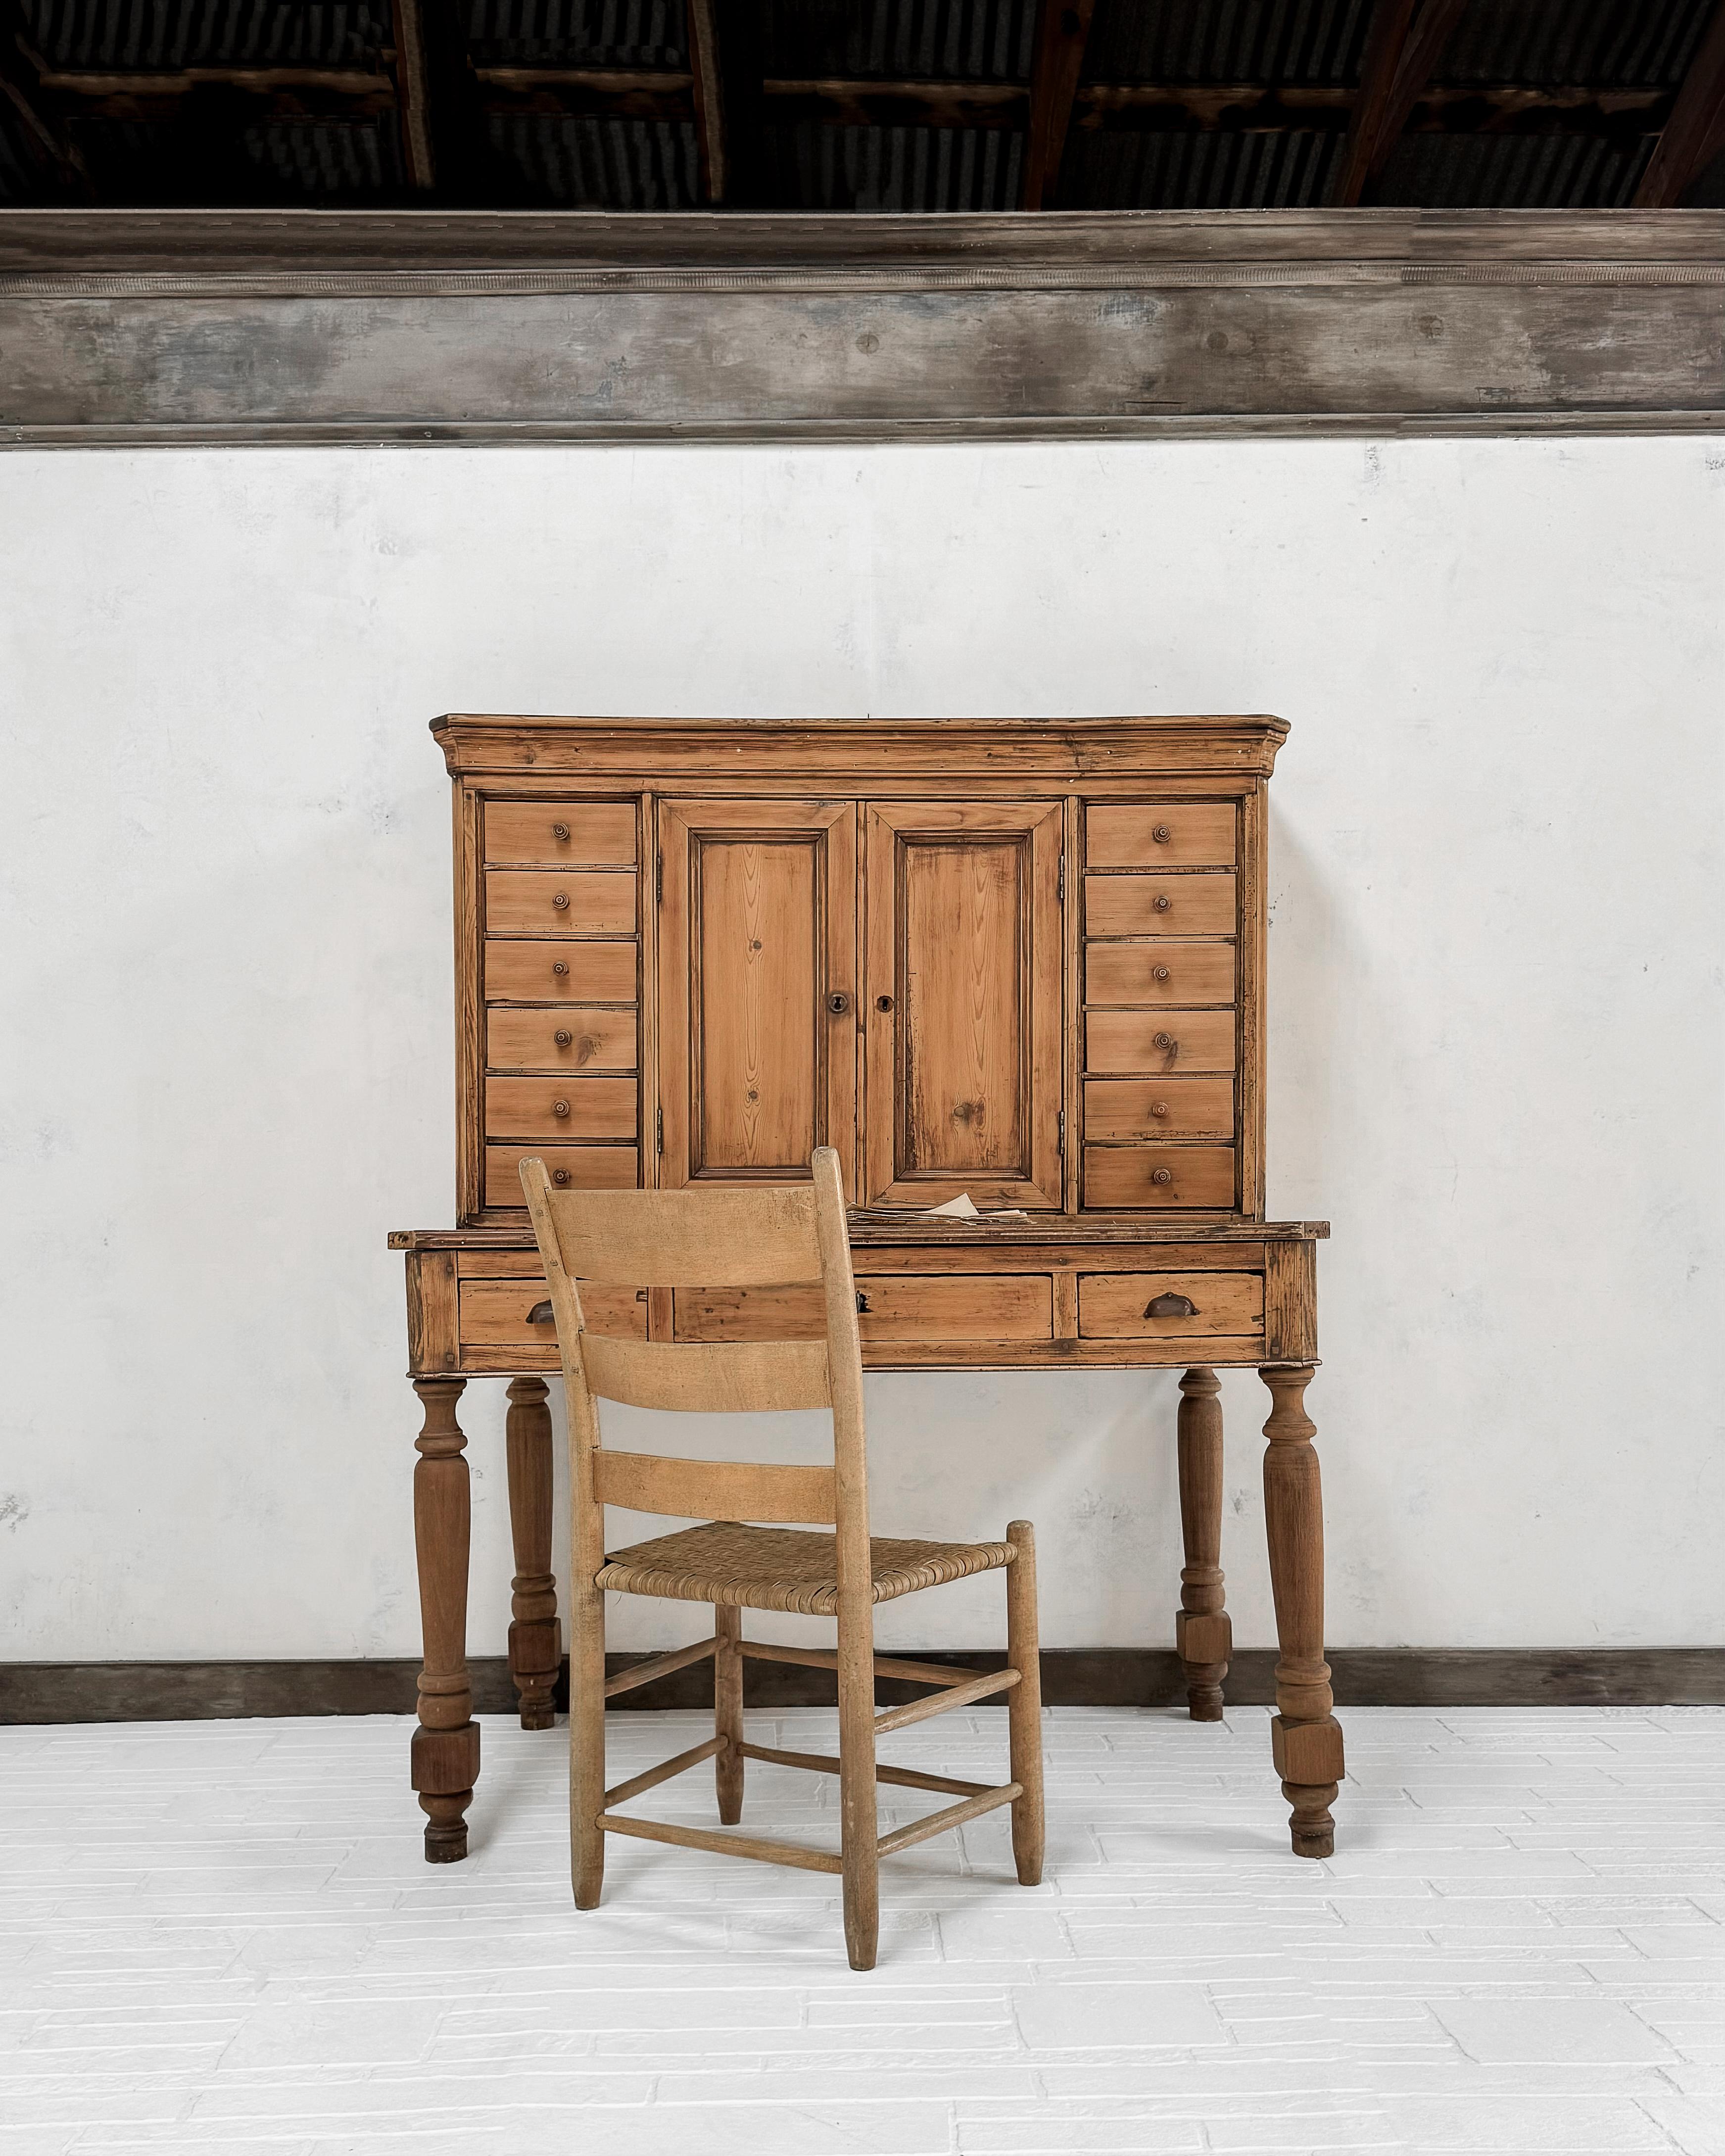 A unique writing desk found in France. Crafted from pine, the desk has been stripped to its natural wood finish (as found), and traces of the old stain remain. This wonderful piece boasts an abundance of storage options, featuring an array of 15